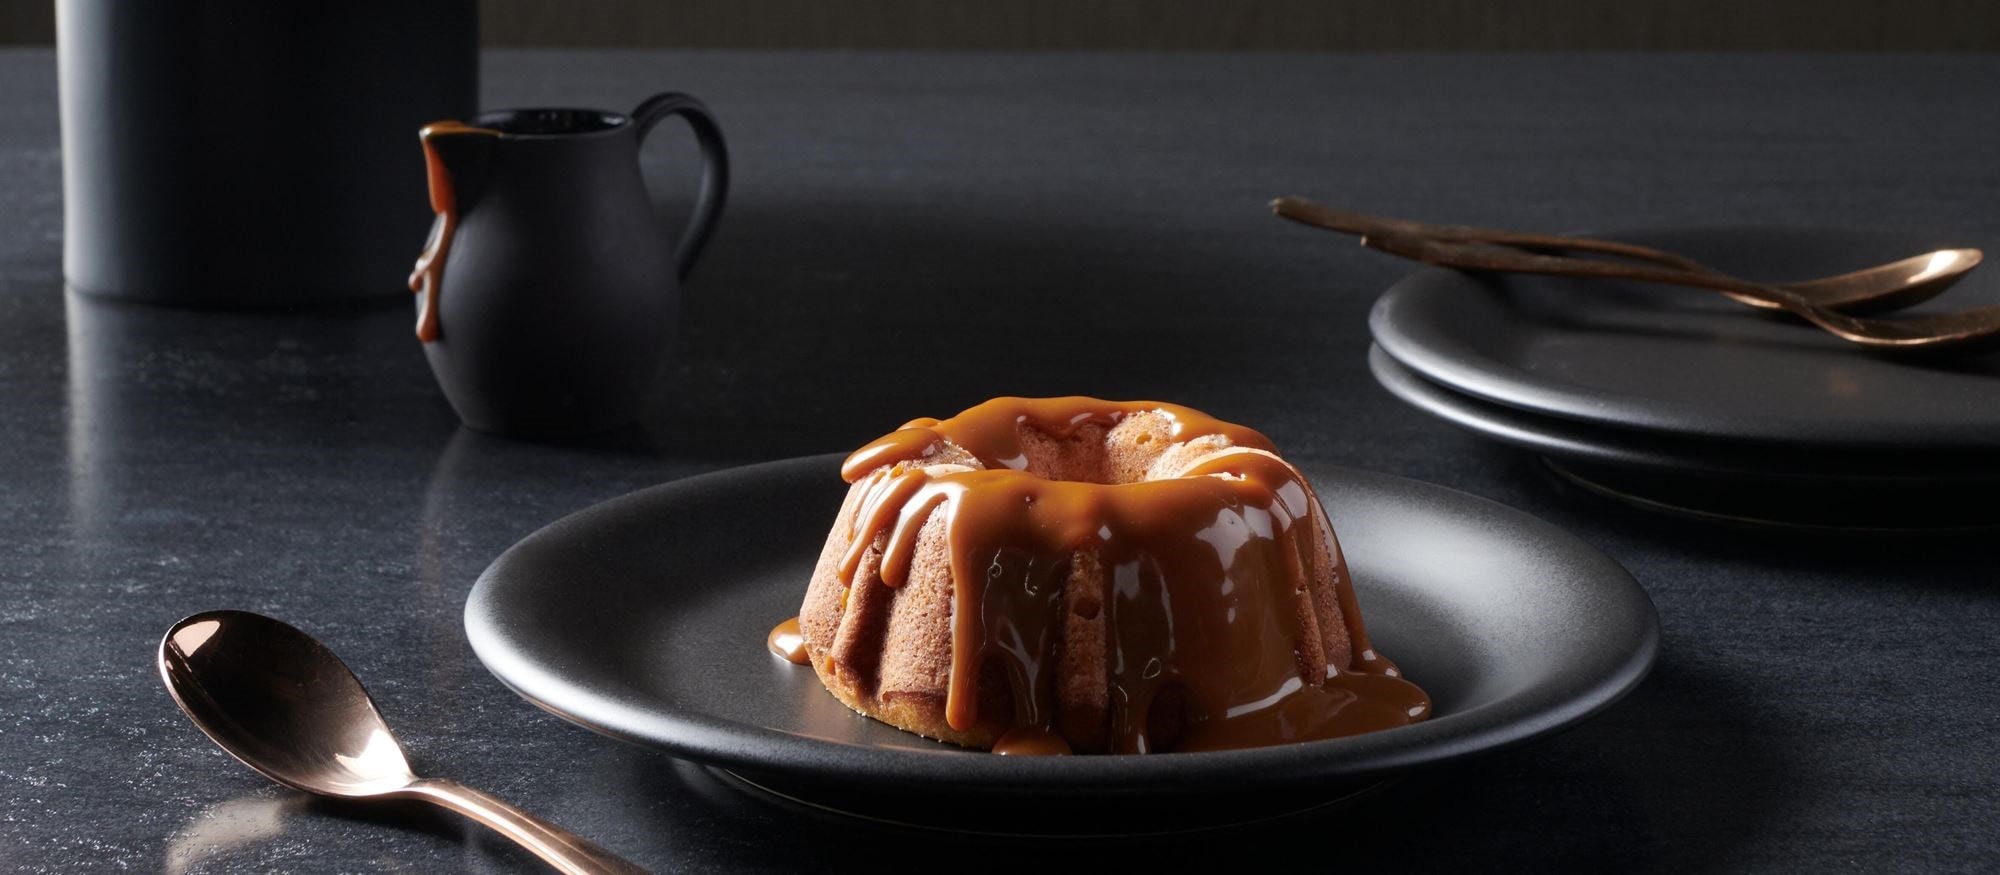 Easy and delicious Miniature Salted Caramel Bundt Cakes recipe using the Bake Mode setting of your Wolf Oven